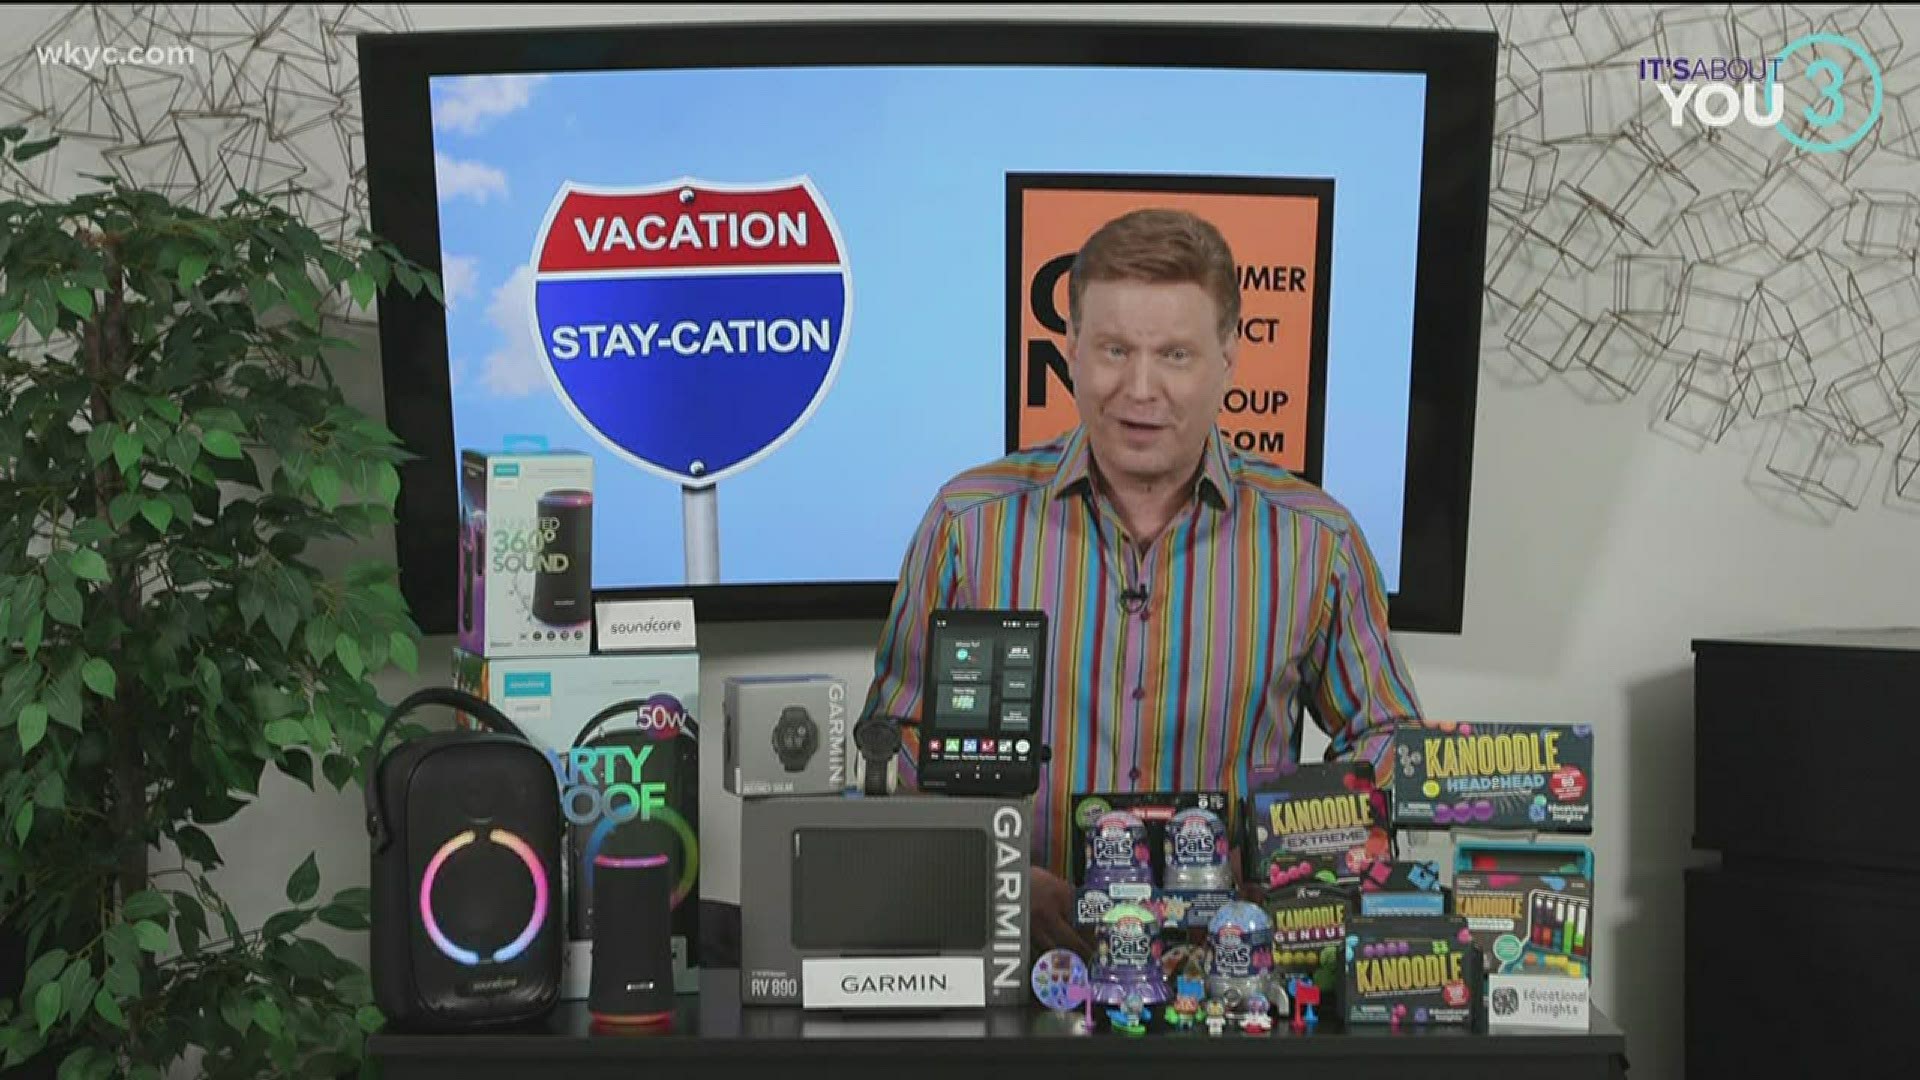 David Gregg gives us some great products for on-the-go entertainment and items to take with you on vacations!